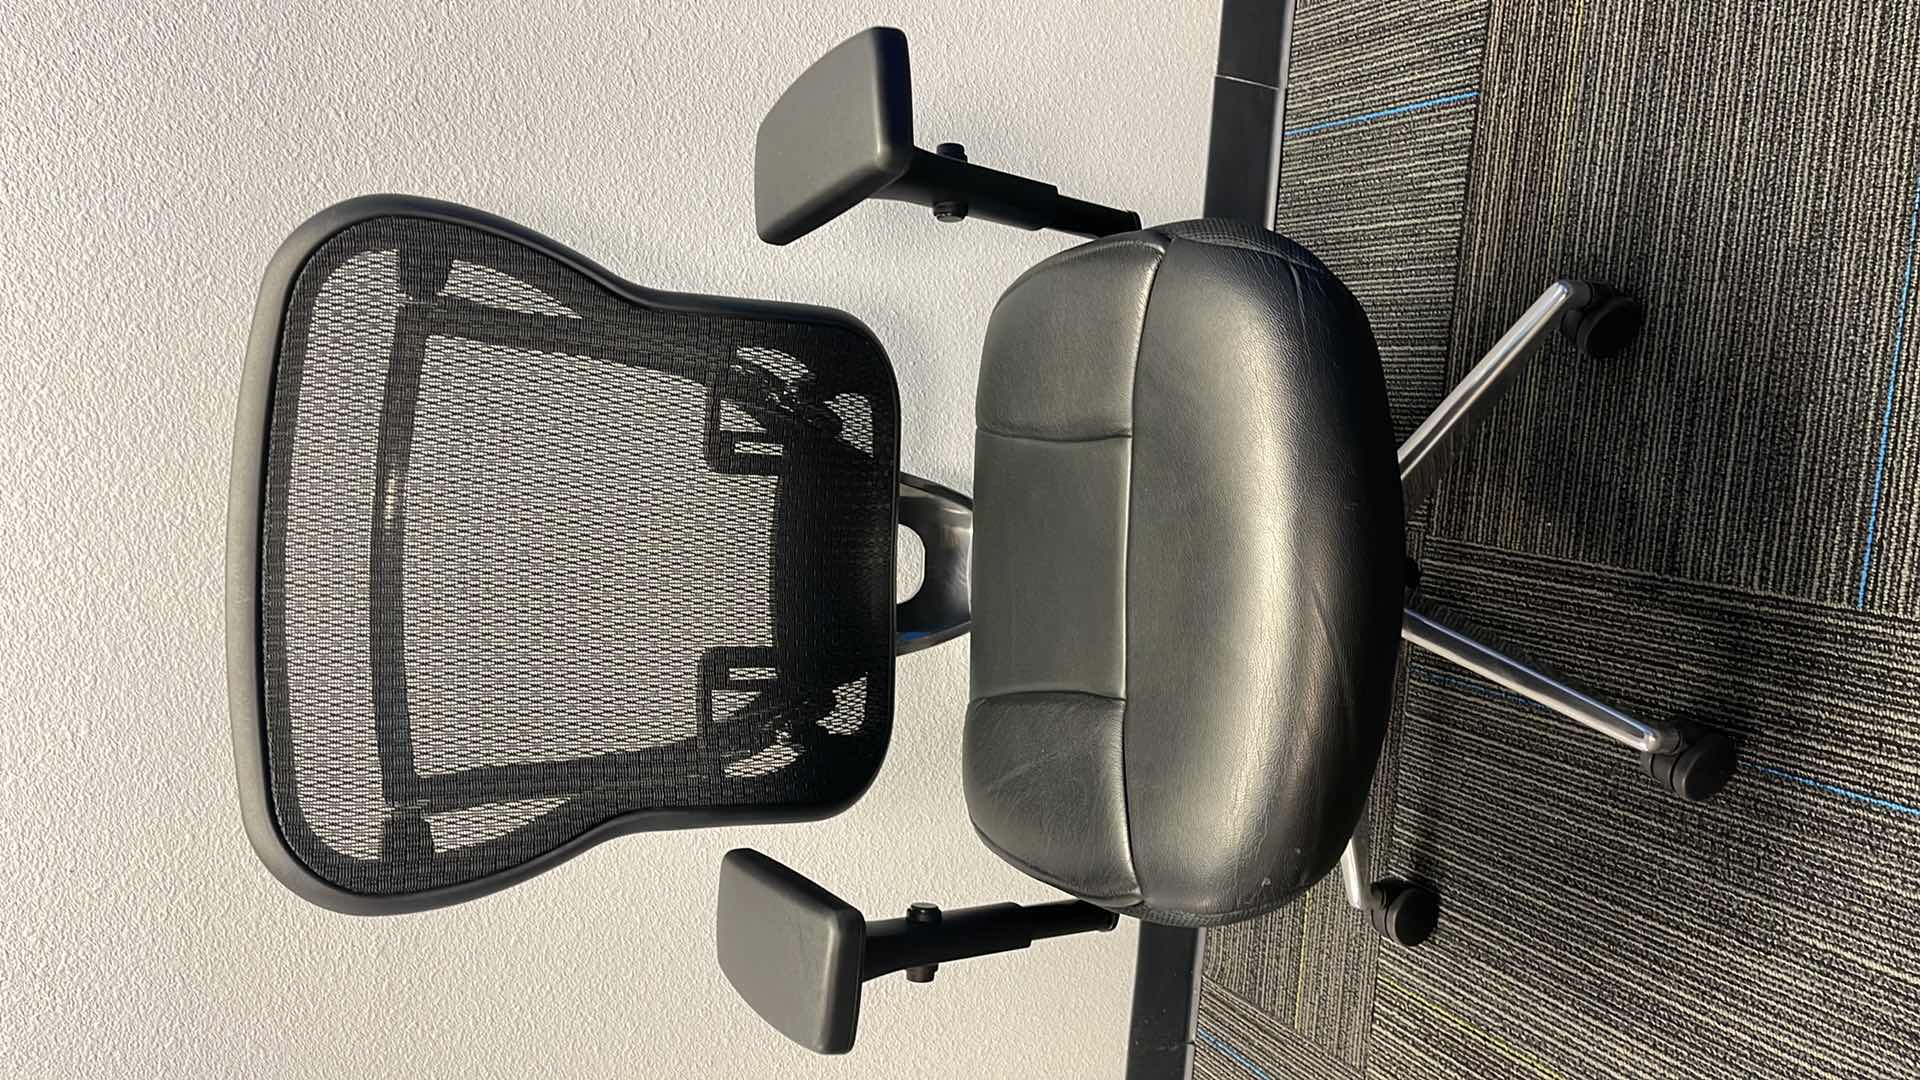 Photo 1 of COMMERCIAL MEDAL BASE ROLLING OFFICE CHAIR W LEATHER SEAT & LUMBAR SUPPORT